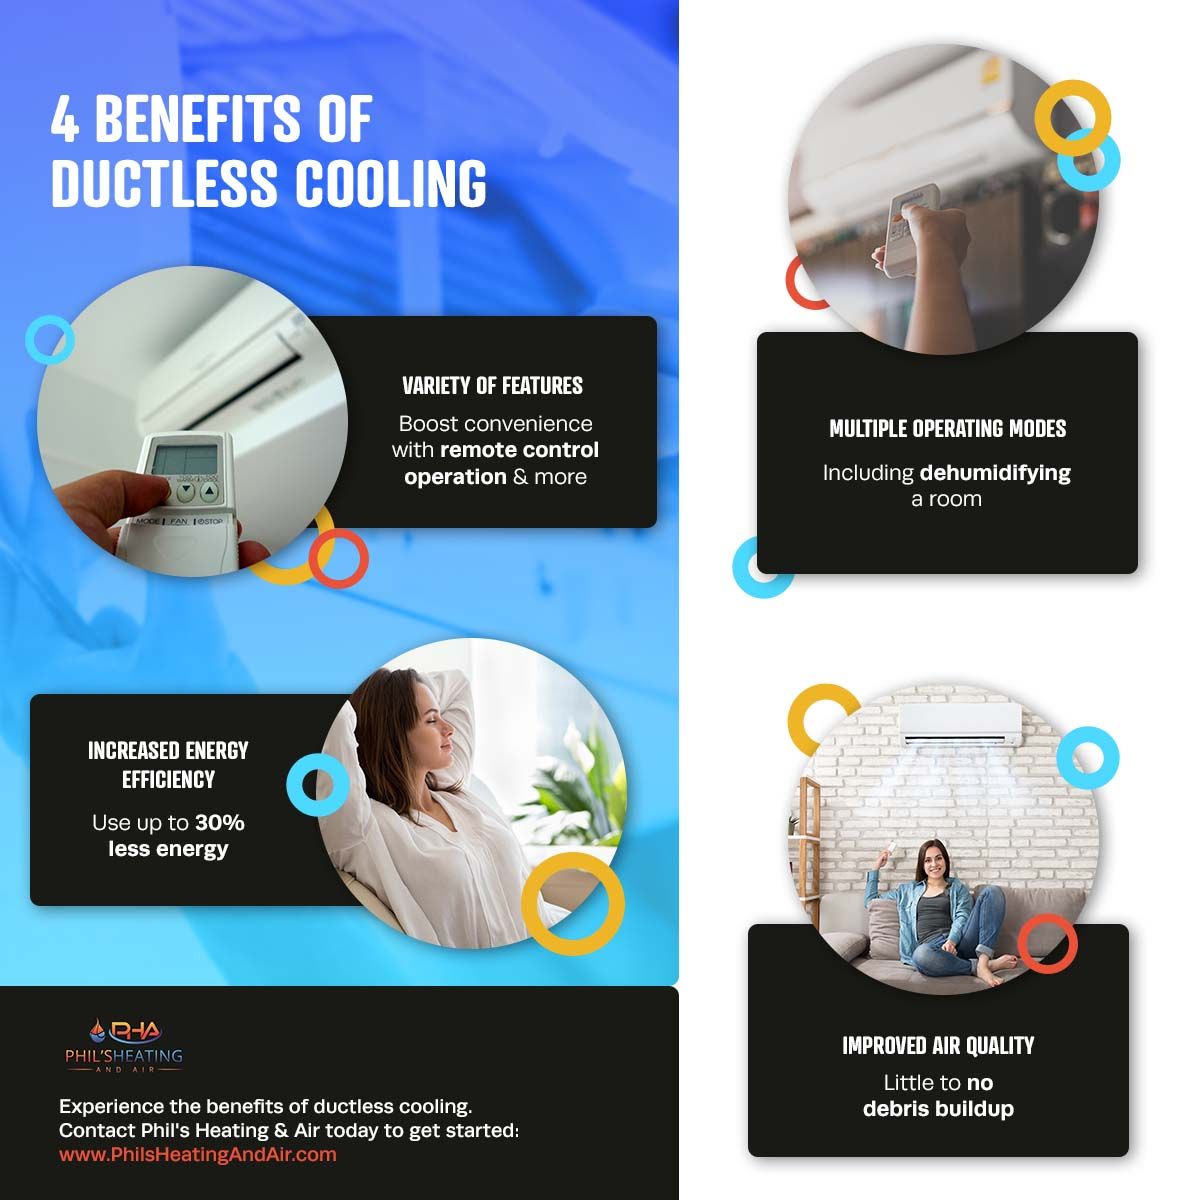 4 Benefits of Ductless Cooling